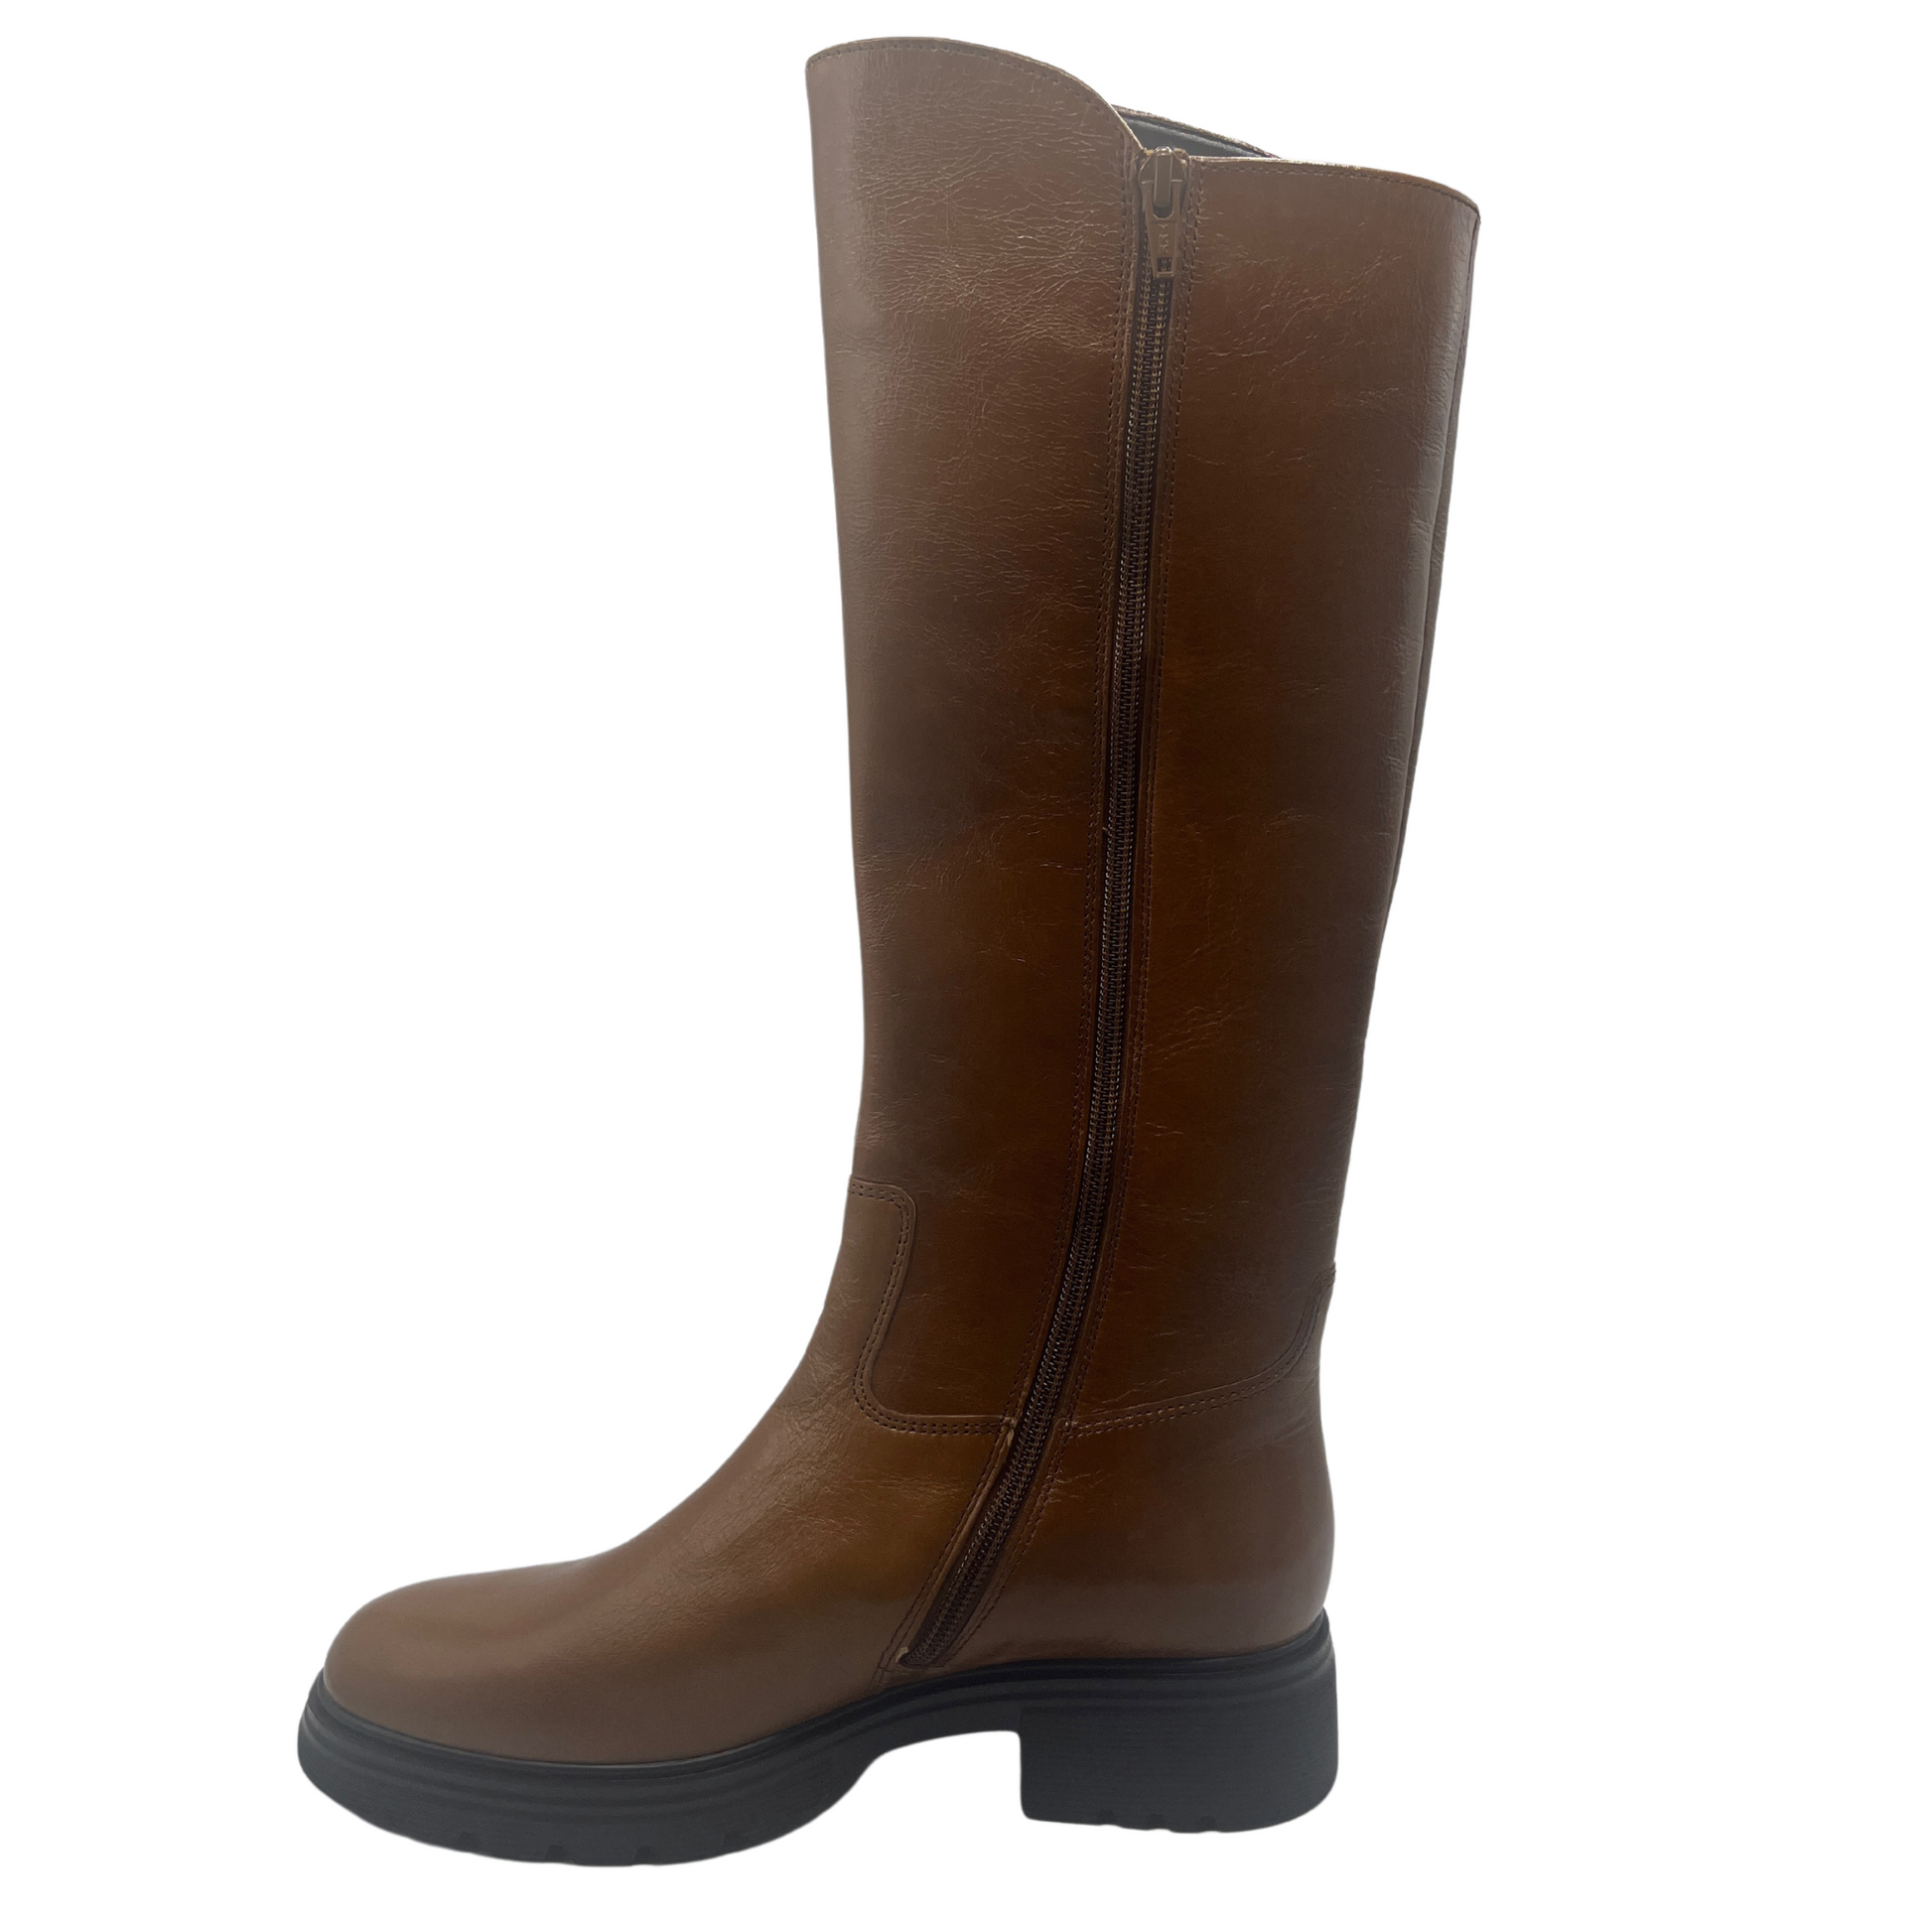 Left facing view of brown leather riding boot with double zipper closure